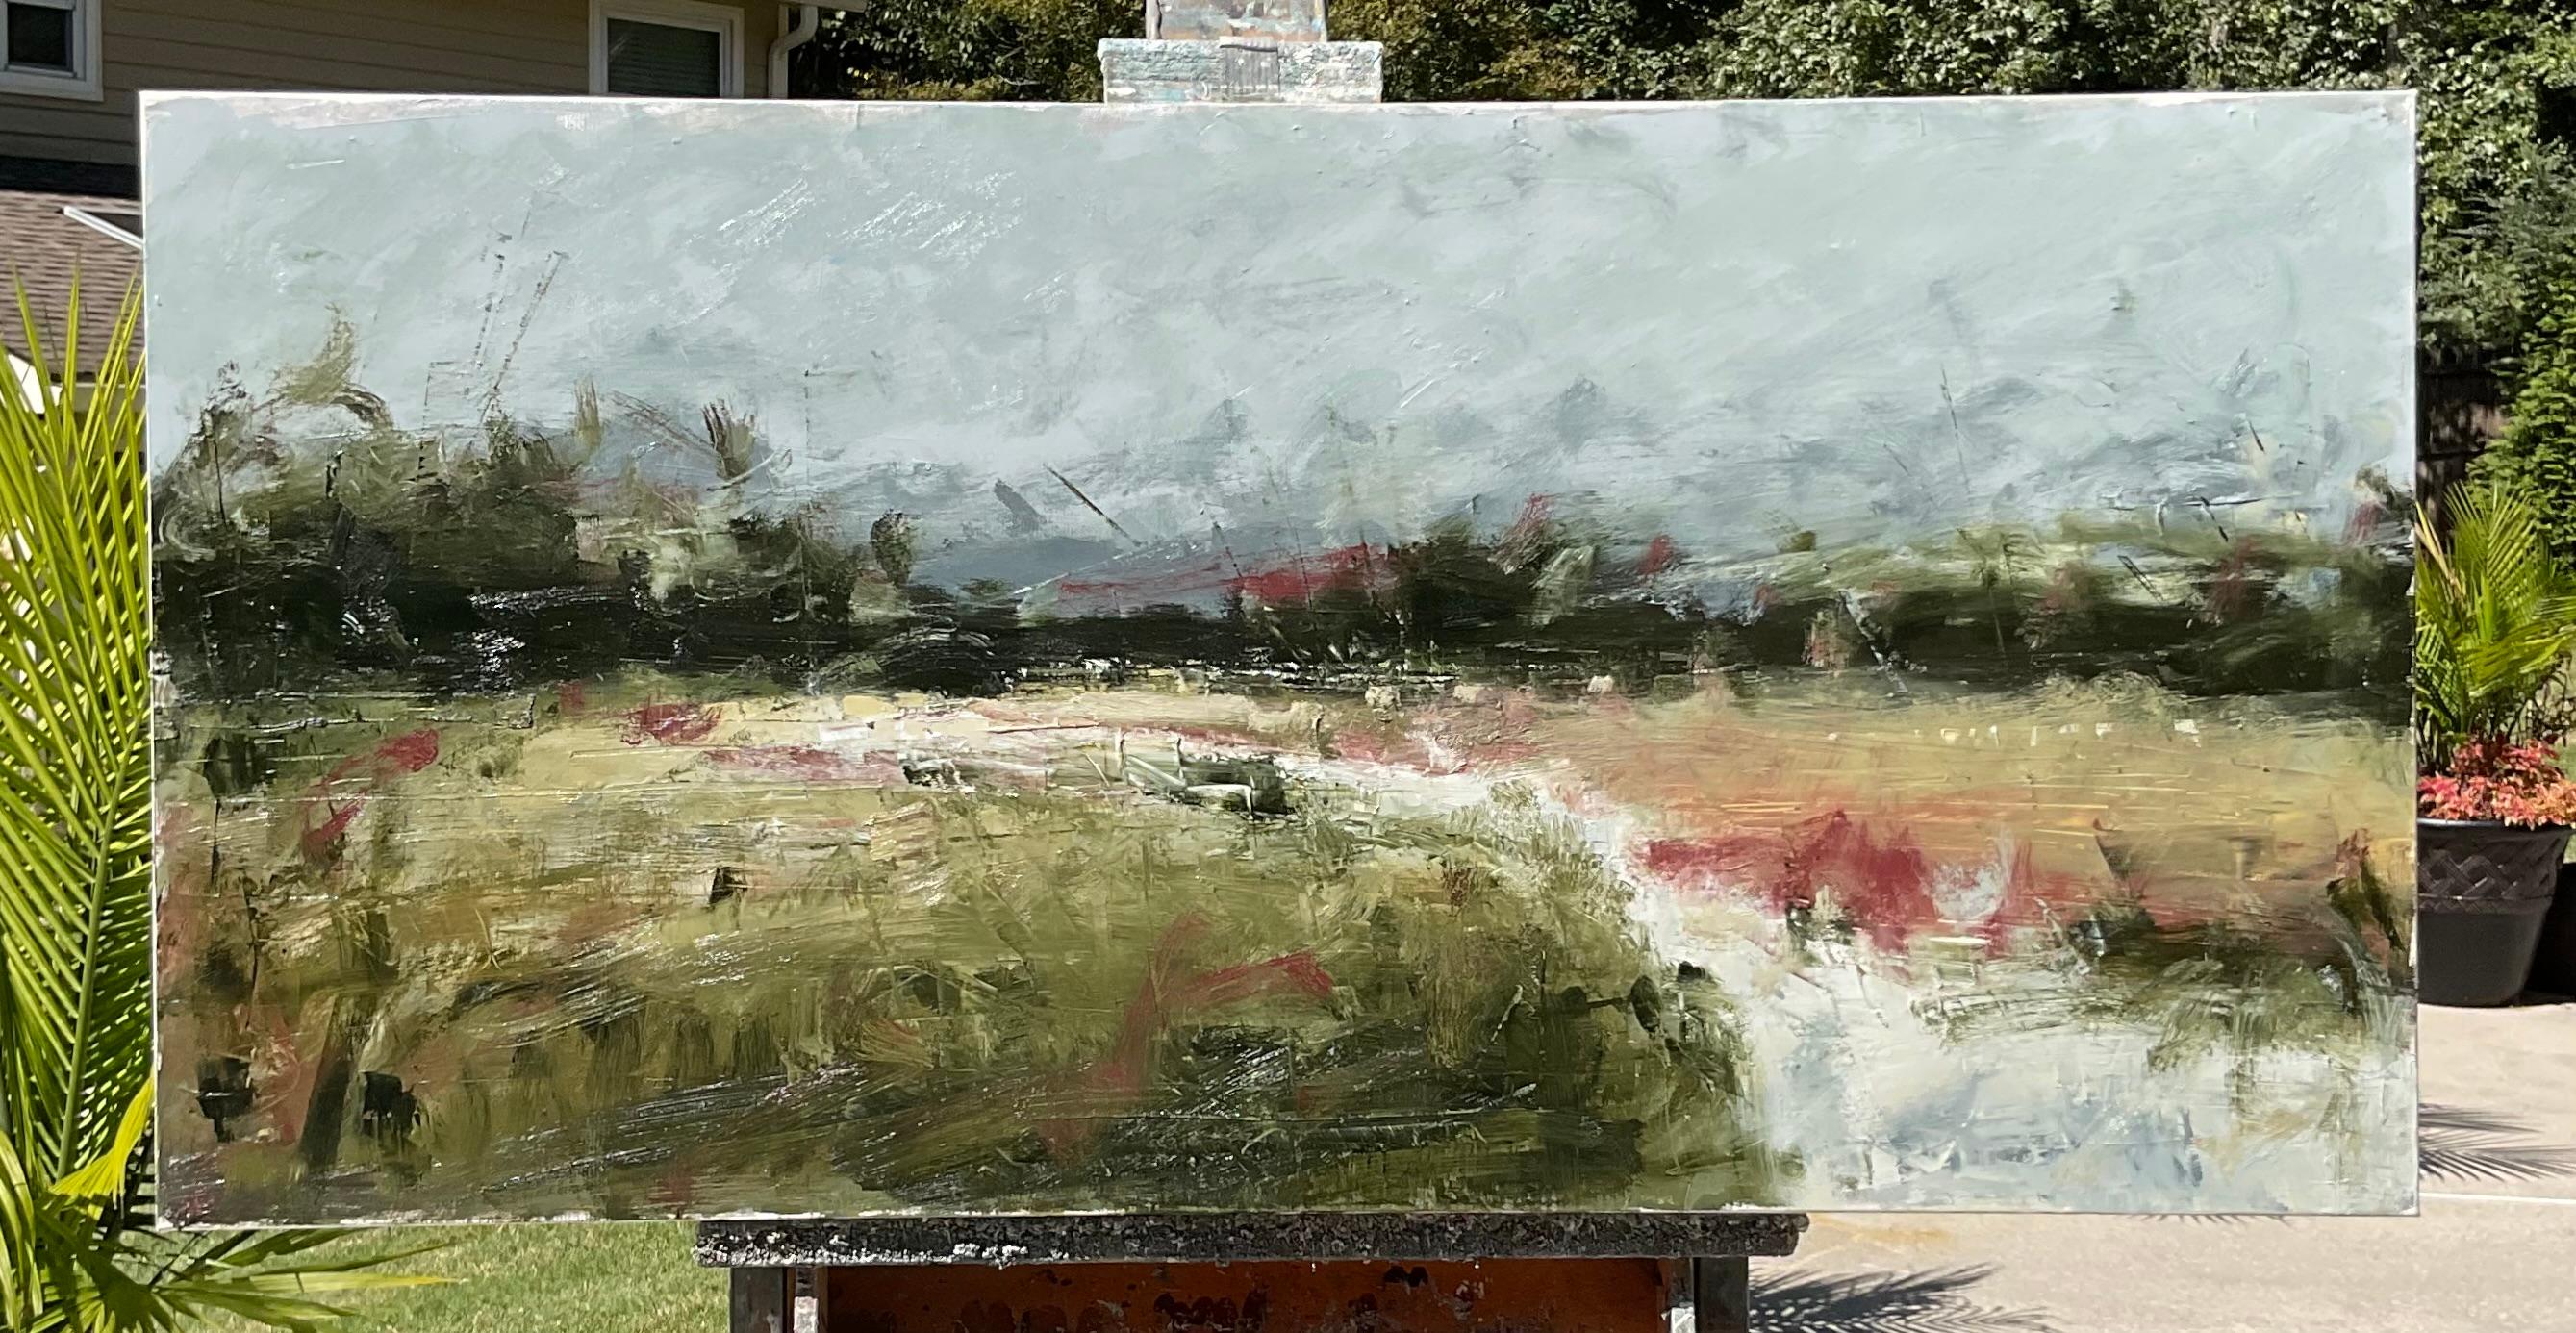 <p>Artist Comments<br>Artist Ronda Waiksnis paints a tranquil river scene. The water mirrors the sky, parting the vast green fields. Ronda employs a variety of brushes and tools to create striking textures in this serene landscape